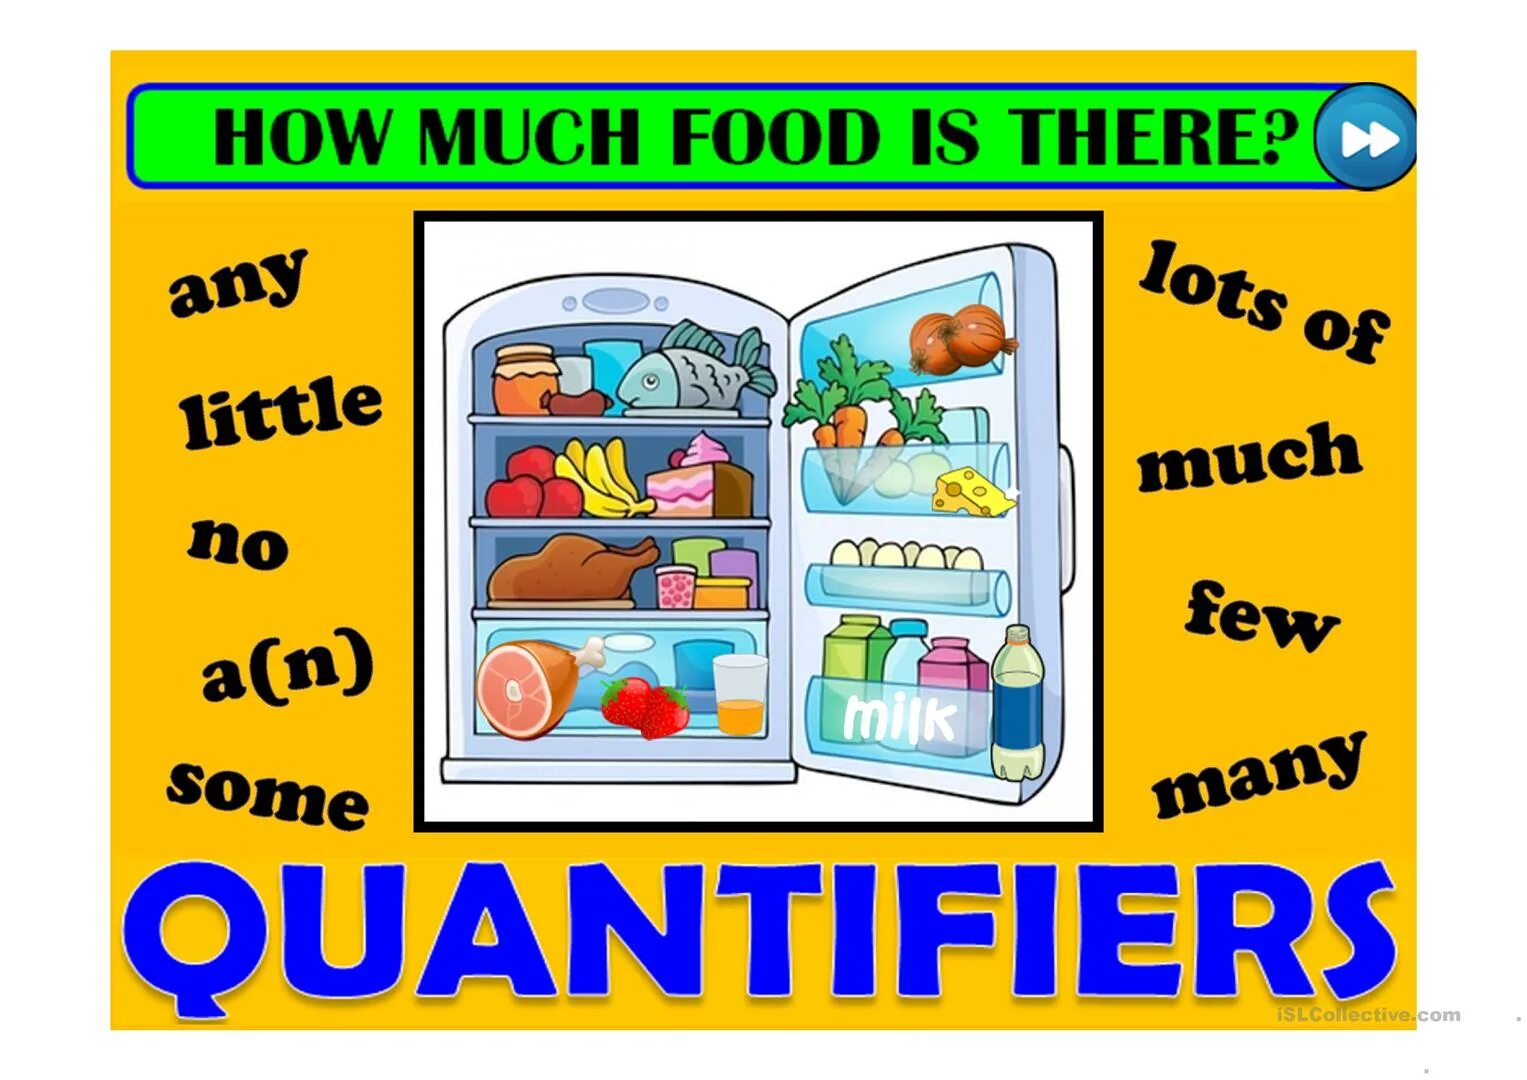 A lot of blank. Much many тема food. How many how much игра. Игра quantifiers. Much many картинки.